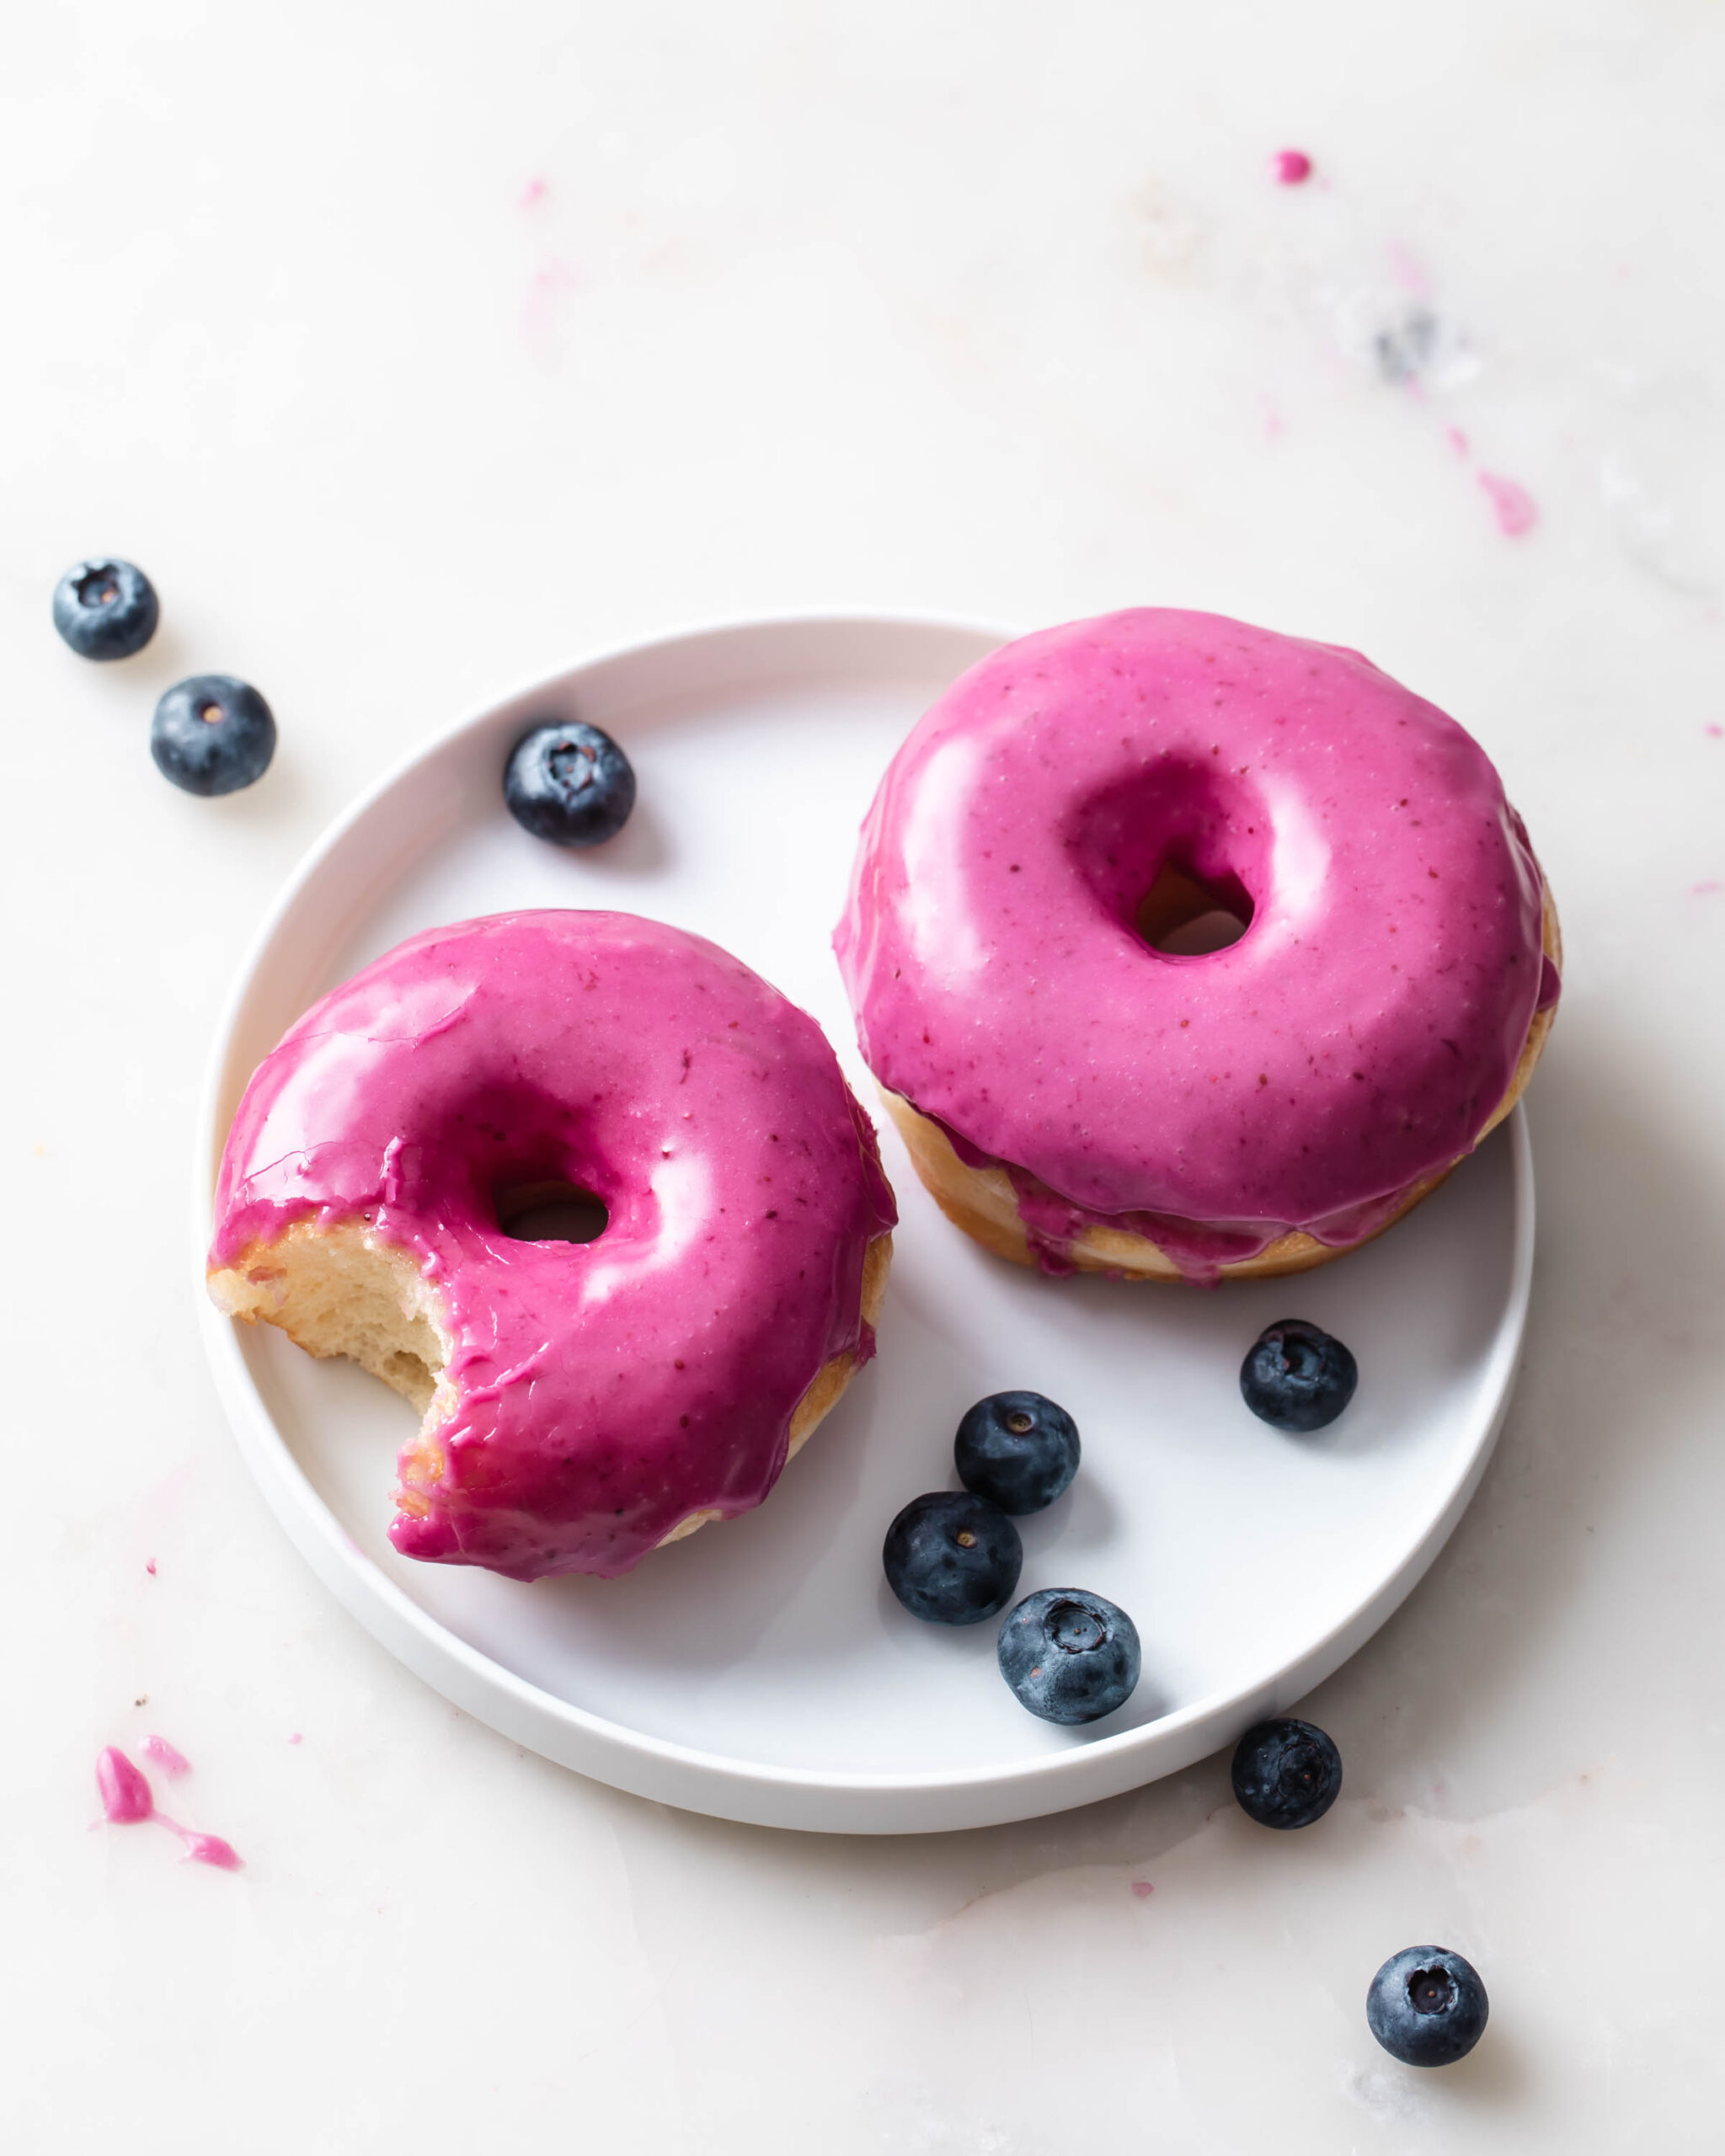 Learn how to bake with yeast to make these blueberry glazed donuts.